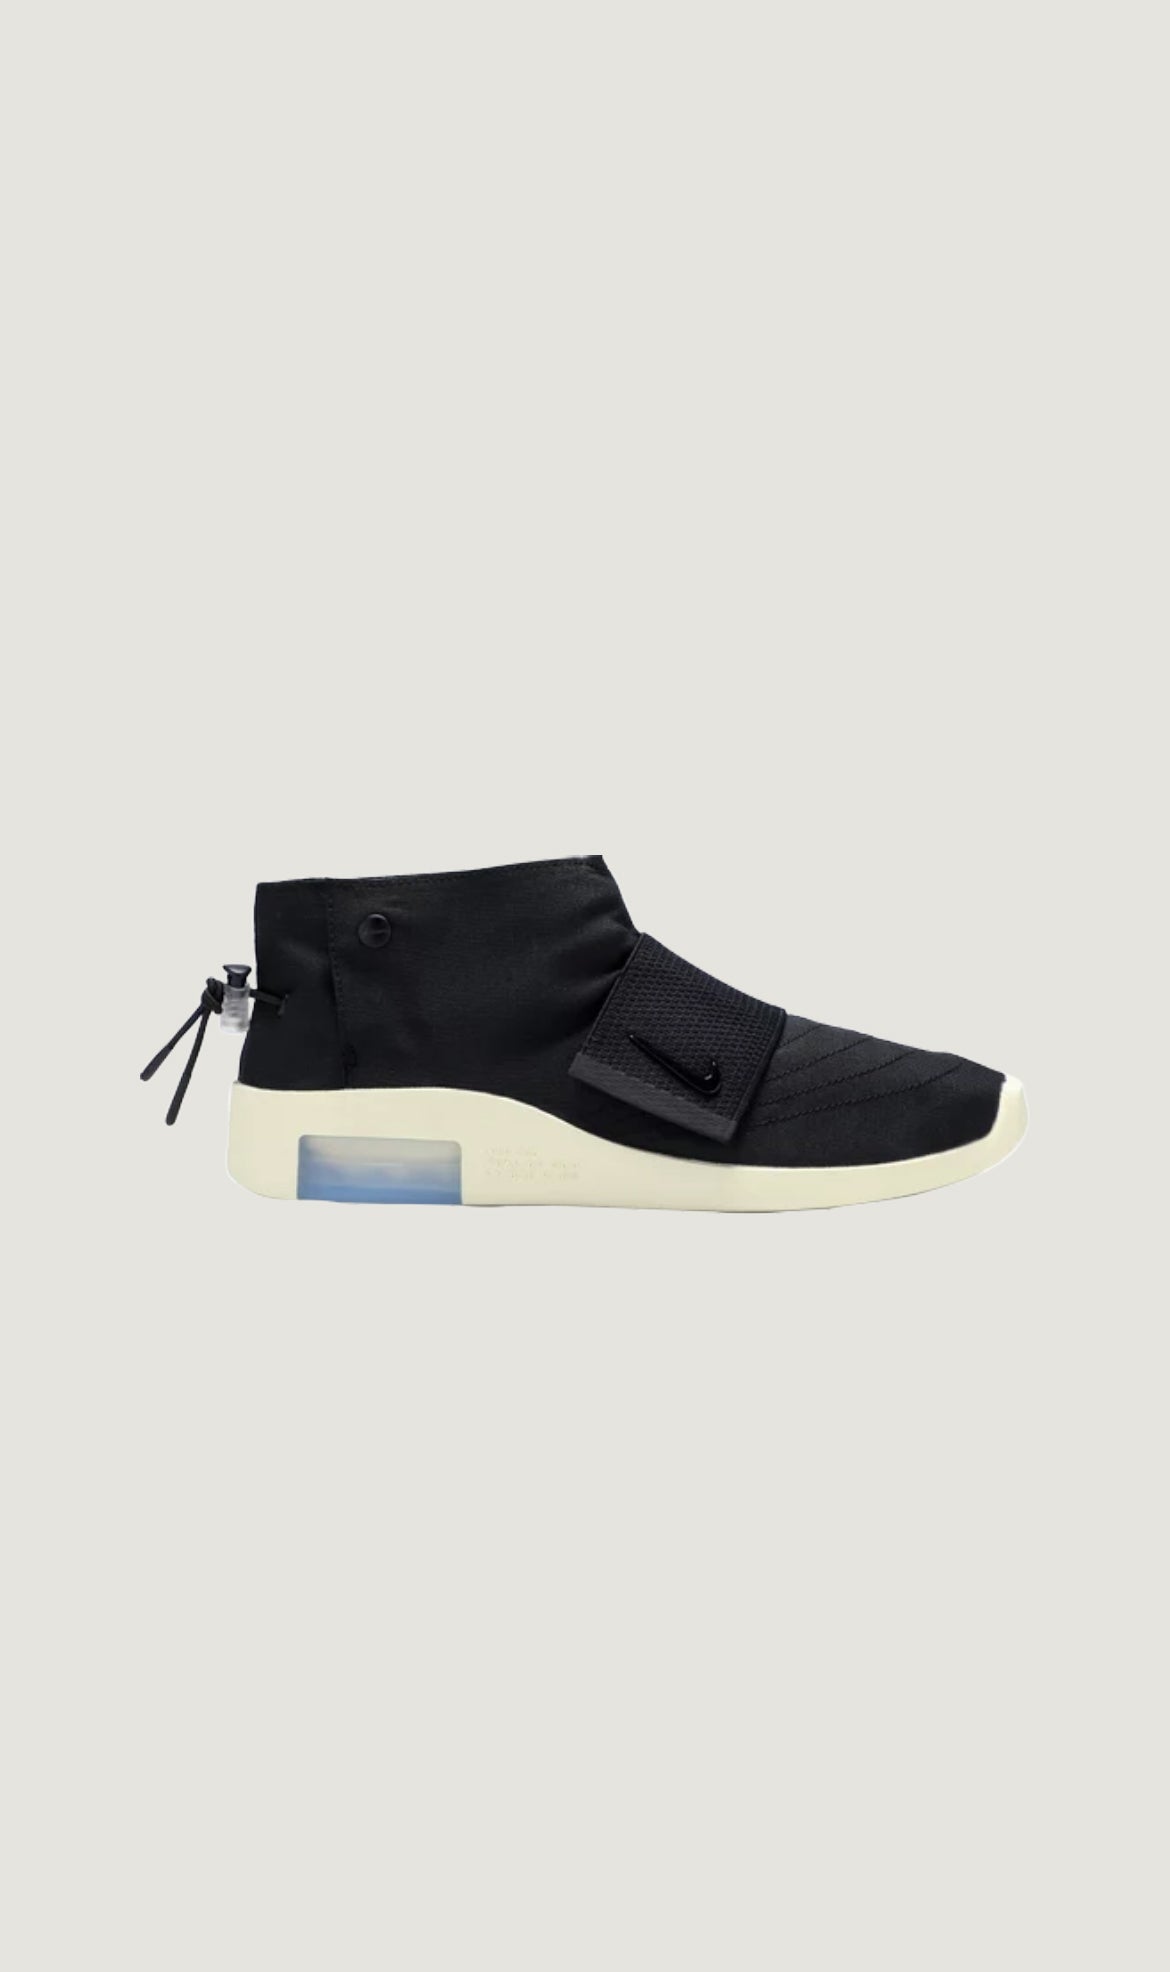 Load image into Gallery viewer, AIR FEAR OF GOD MOC - BLACK
